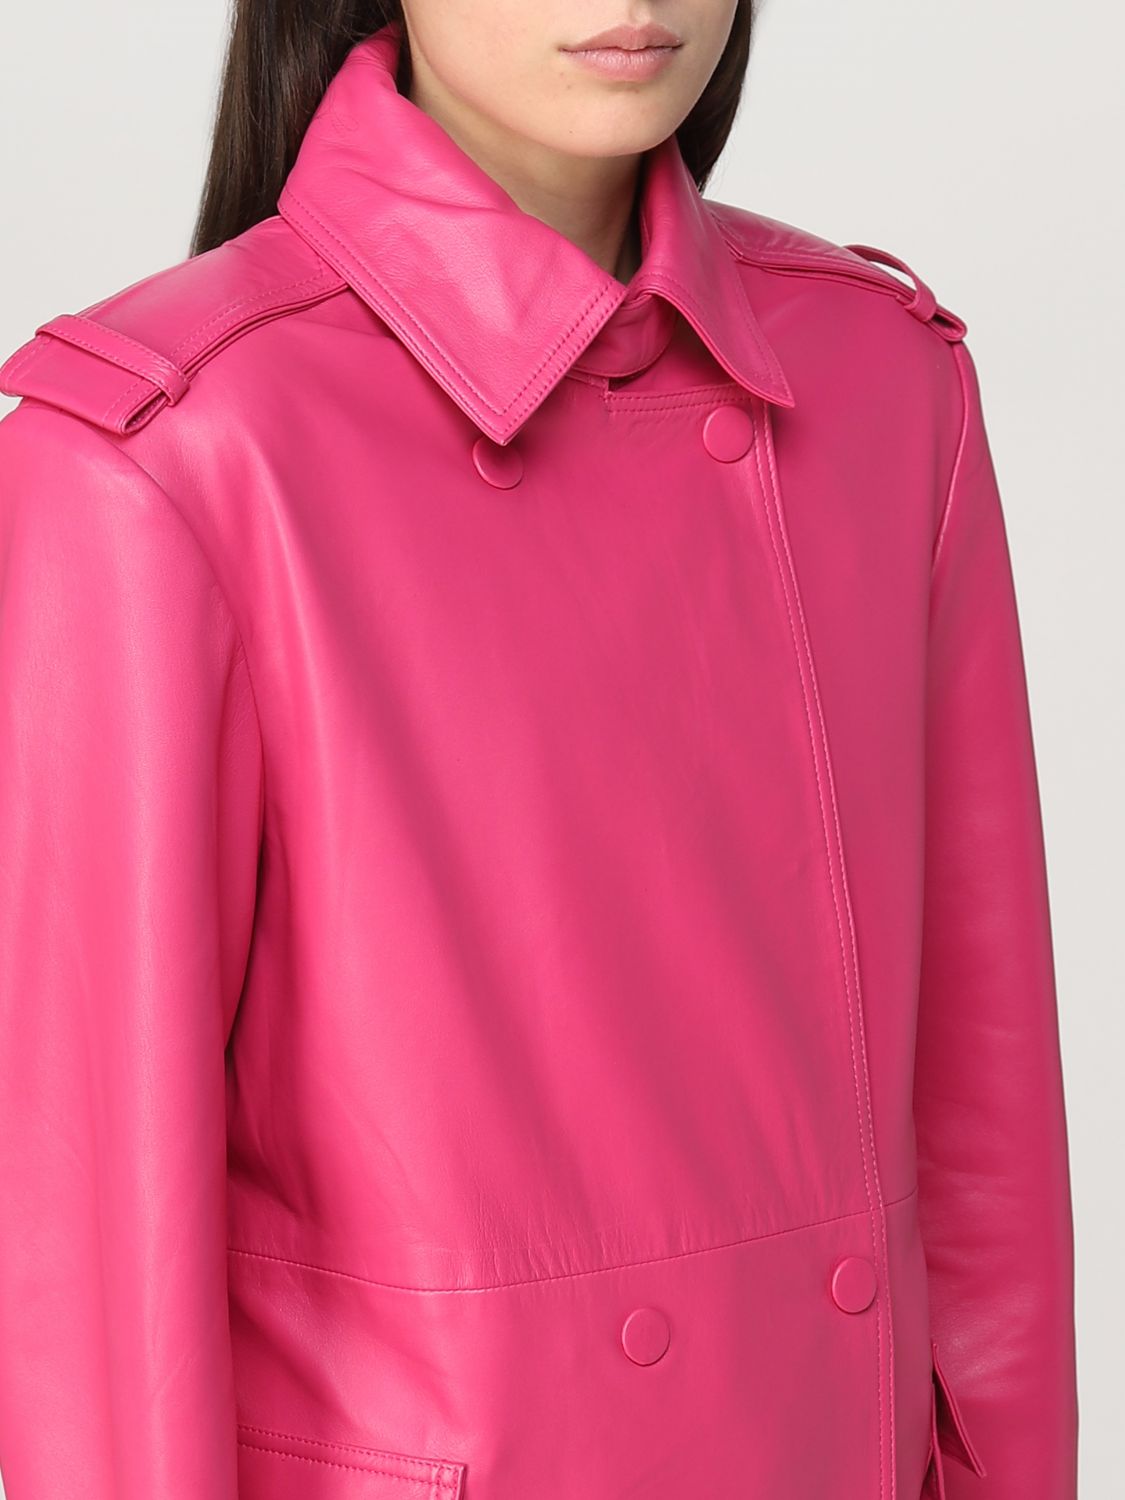 Jacket Remain: Remain jacket for women pink 5